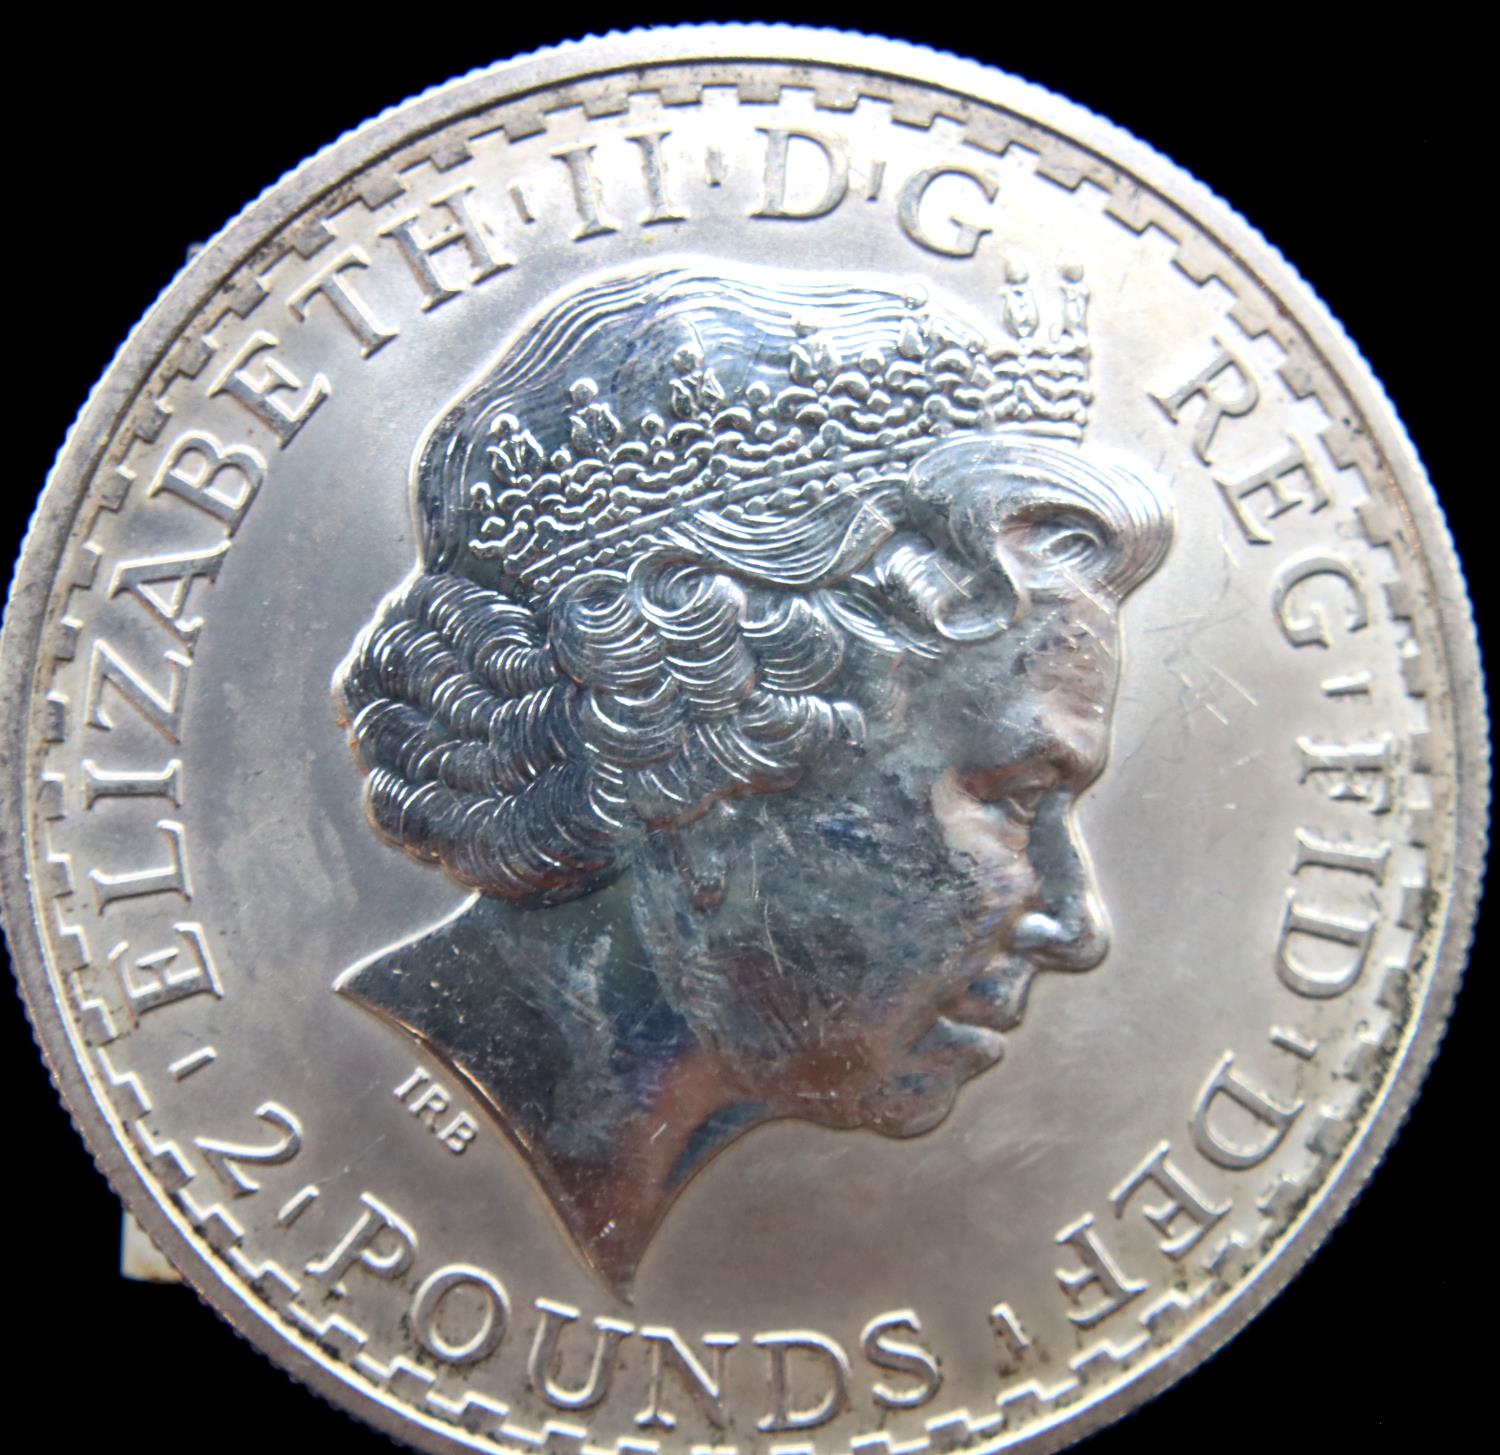 1998 Britannia one-ounce £2 of Elizabeth II. P&P Group 1 (£14+VAT for the first lot and £1+VAT for - Image 2 of 2